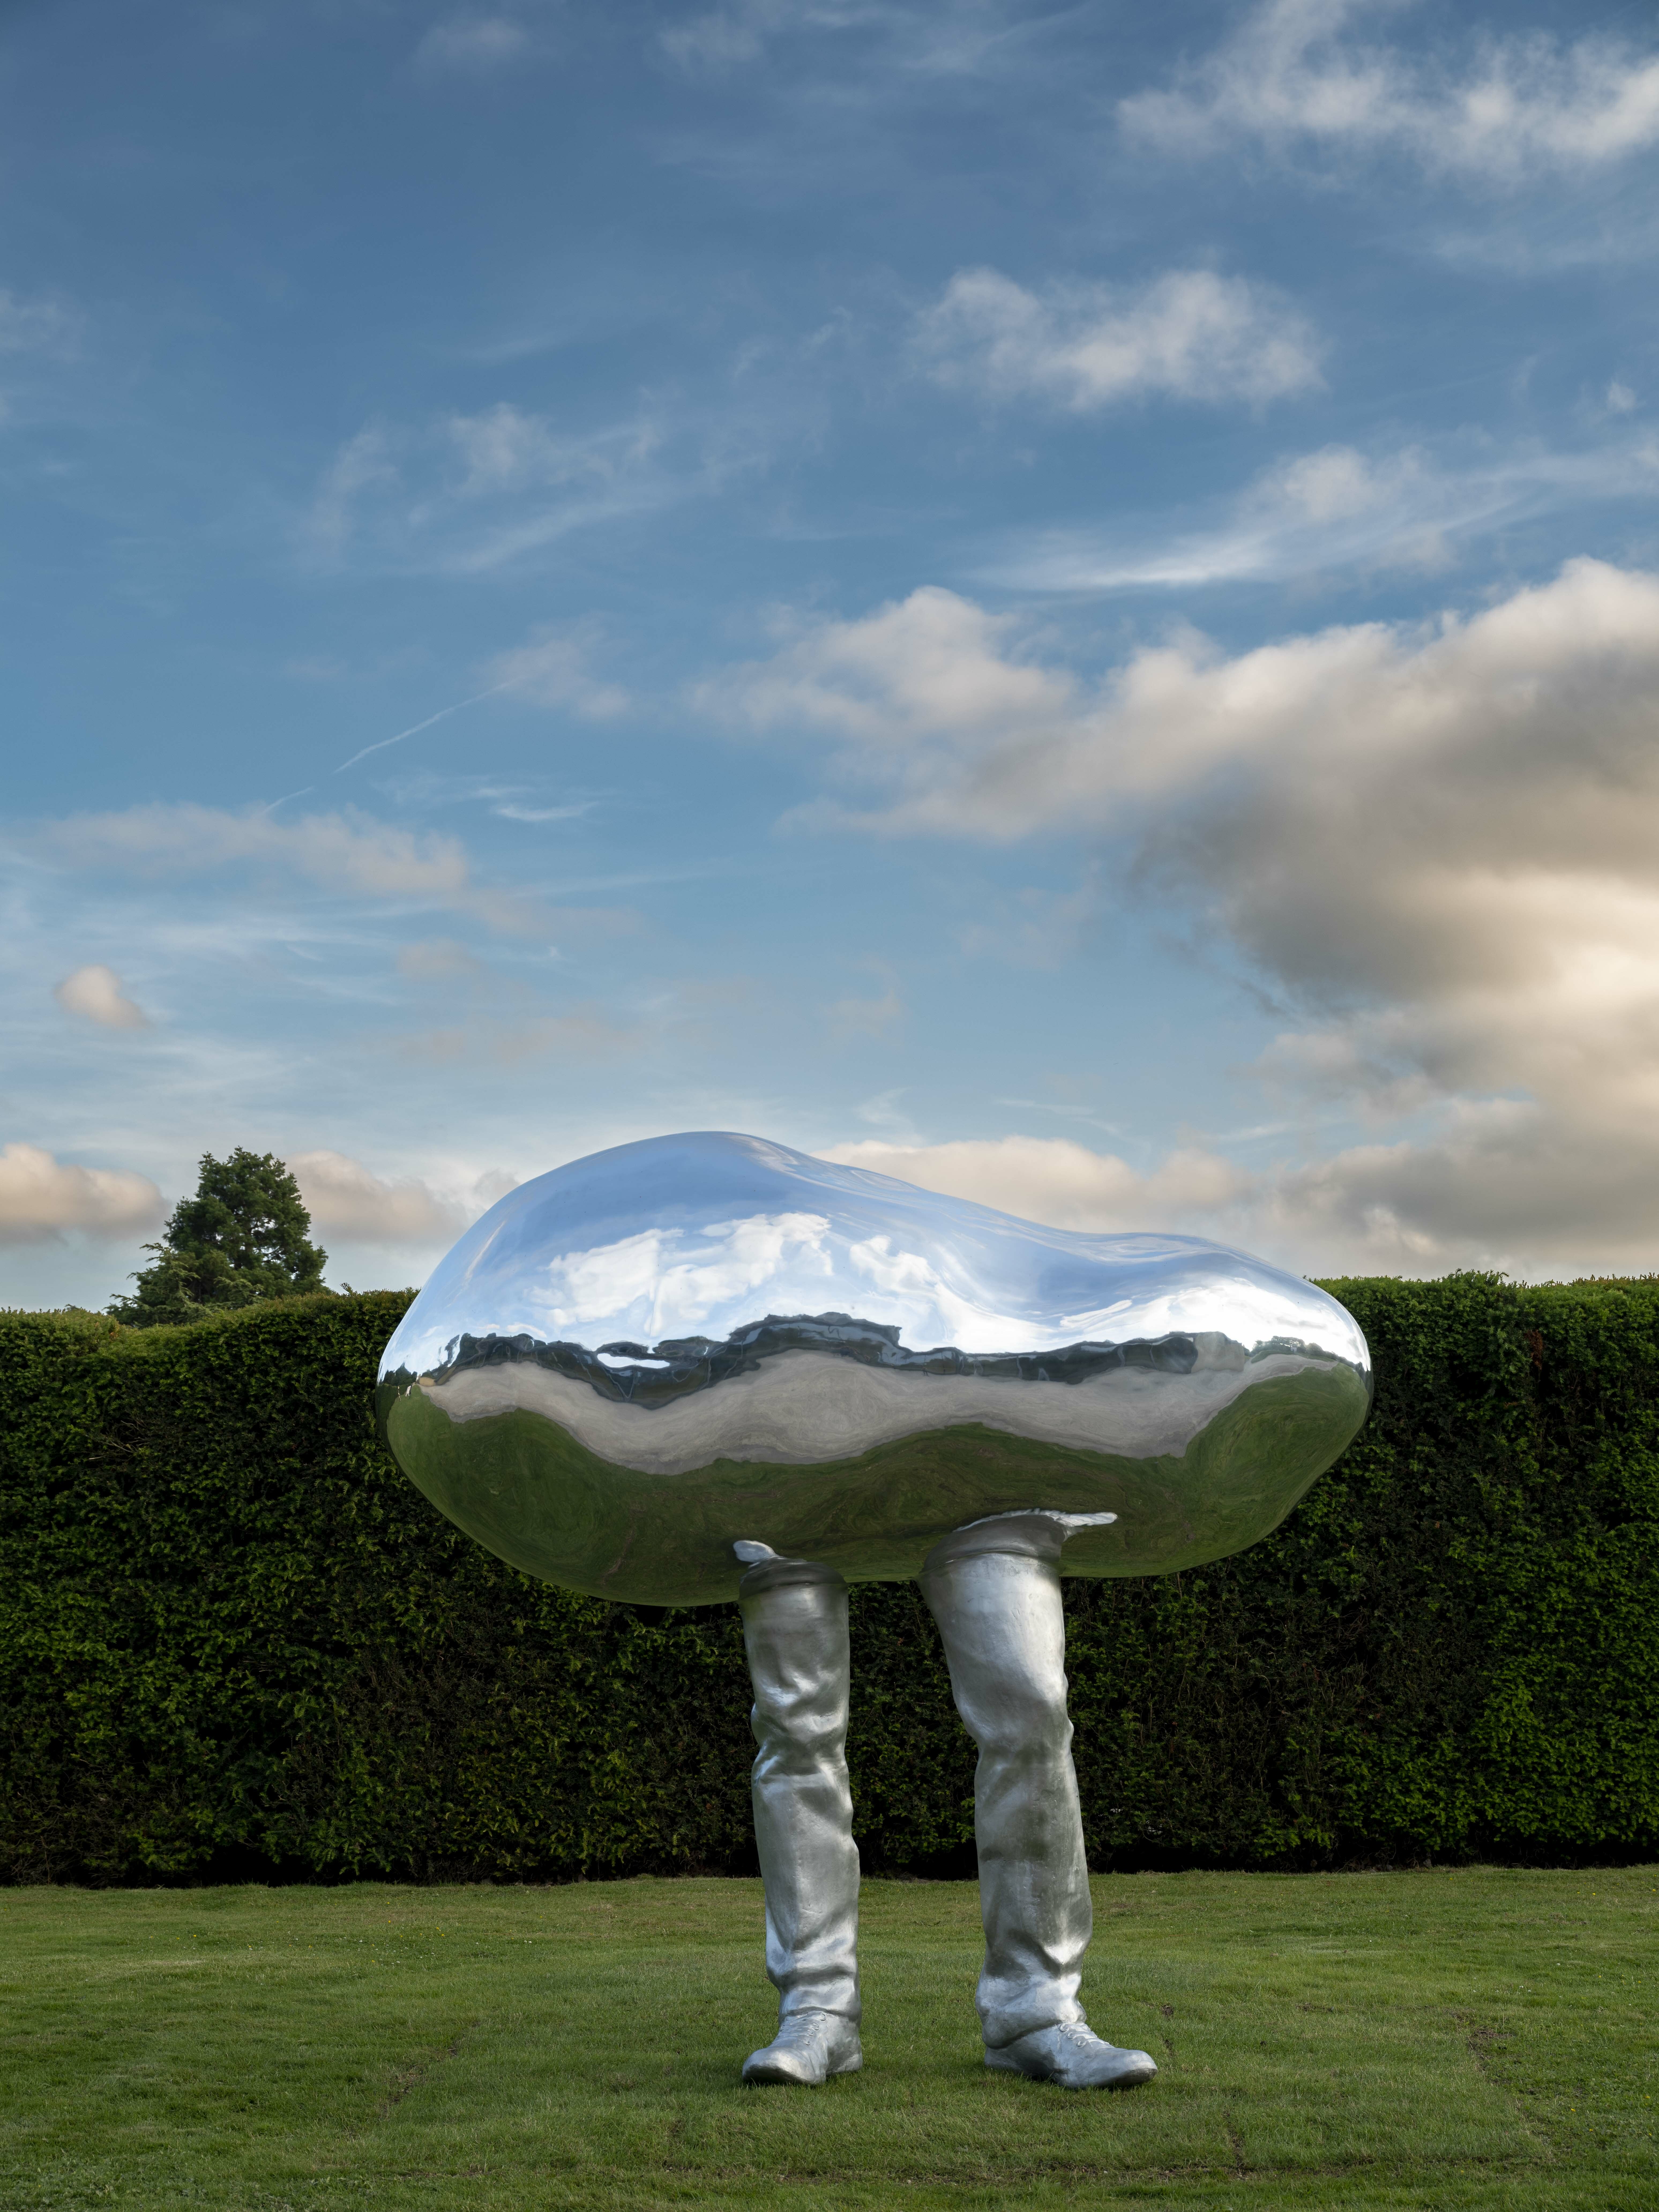 A silver pebble with legs sculpture, stood on grass underneath a blue sky with grey clouds